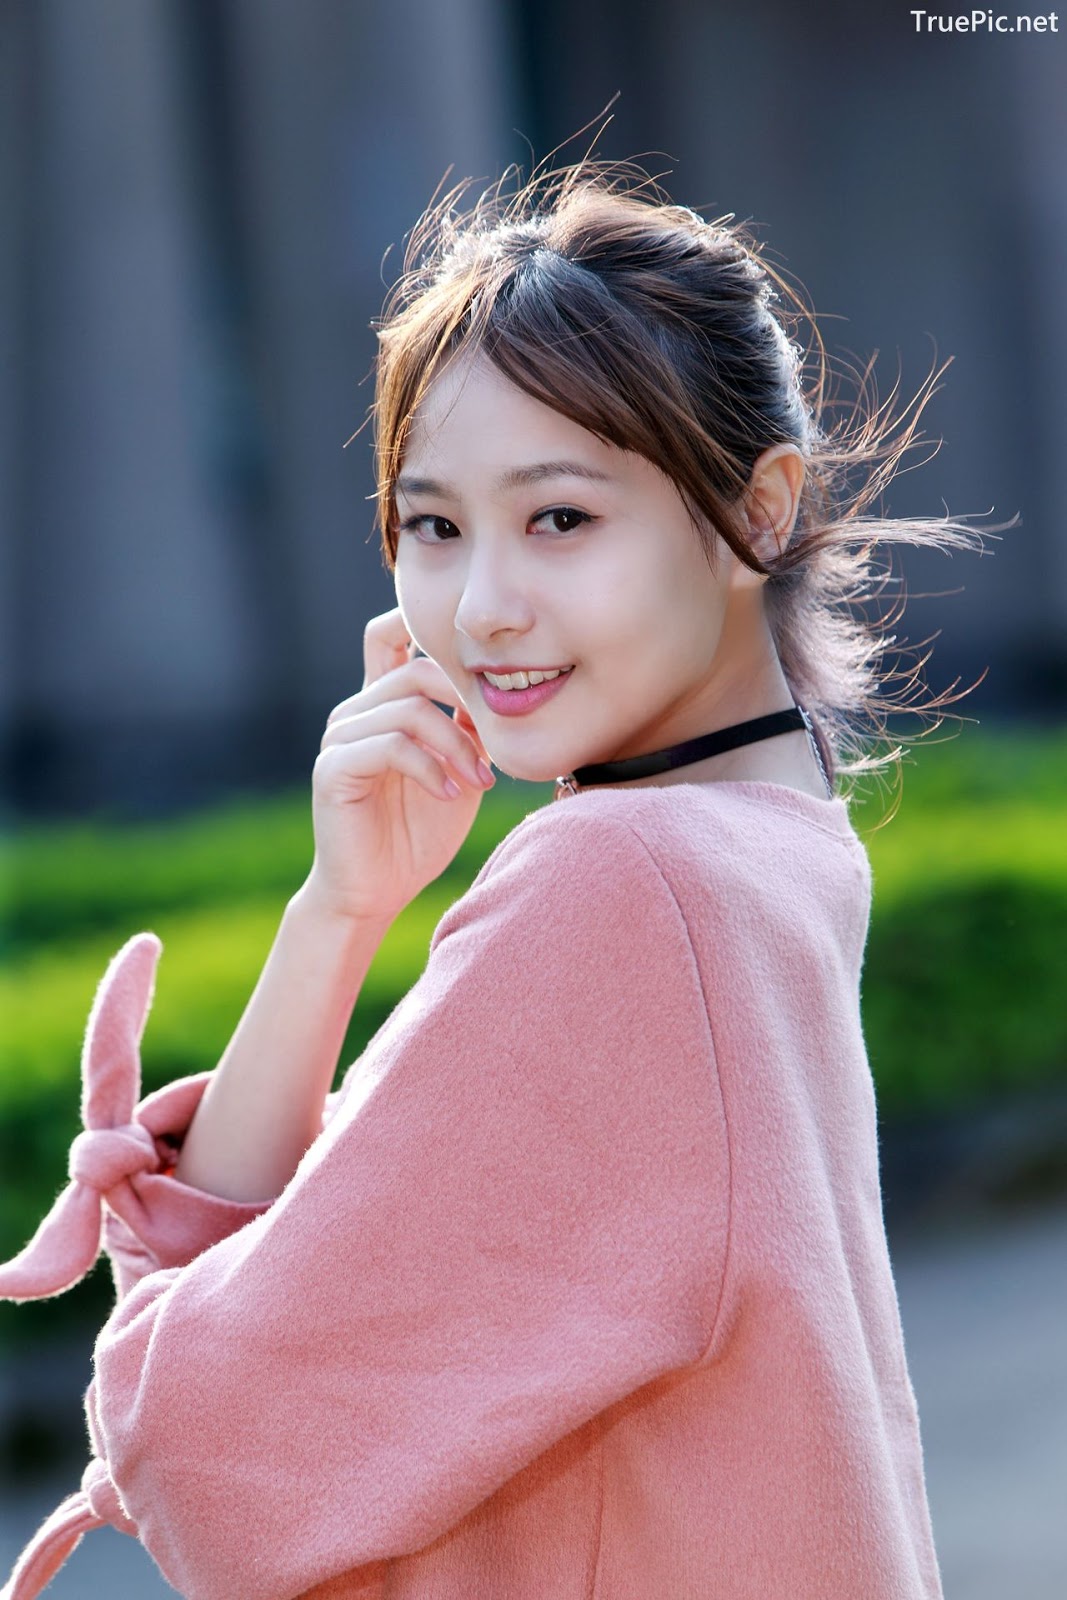 Image-Taiwanese-Model-郭思敏-Pure-And-Gorgeous-Girl-In-Pink-Sweater-Dress-TruePic.net- Picture-15